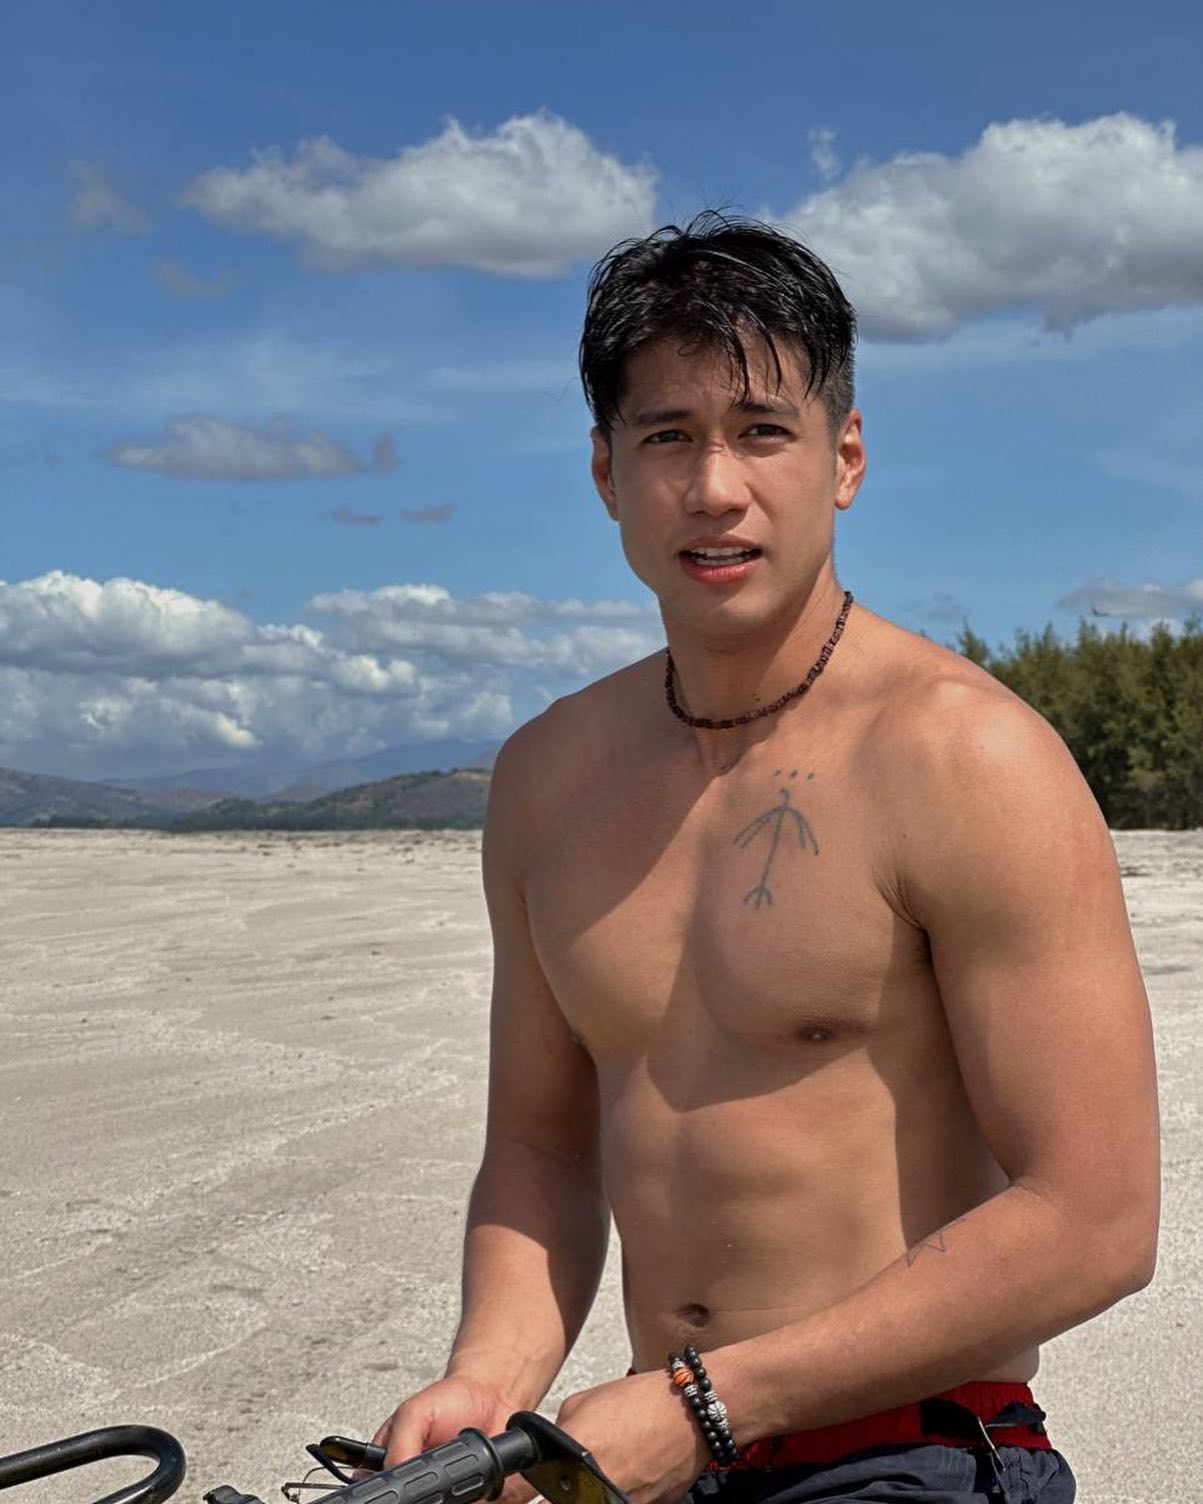 Aljur Abrenica Biography: Age, Net Worth, Instagram, Spouse, Height, Wiki, Parents, Siblings, Songs, Movies